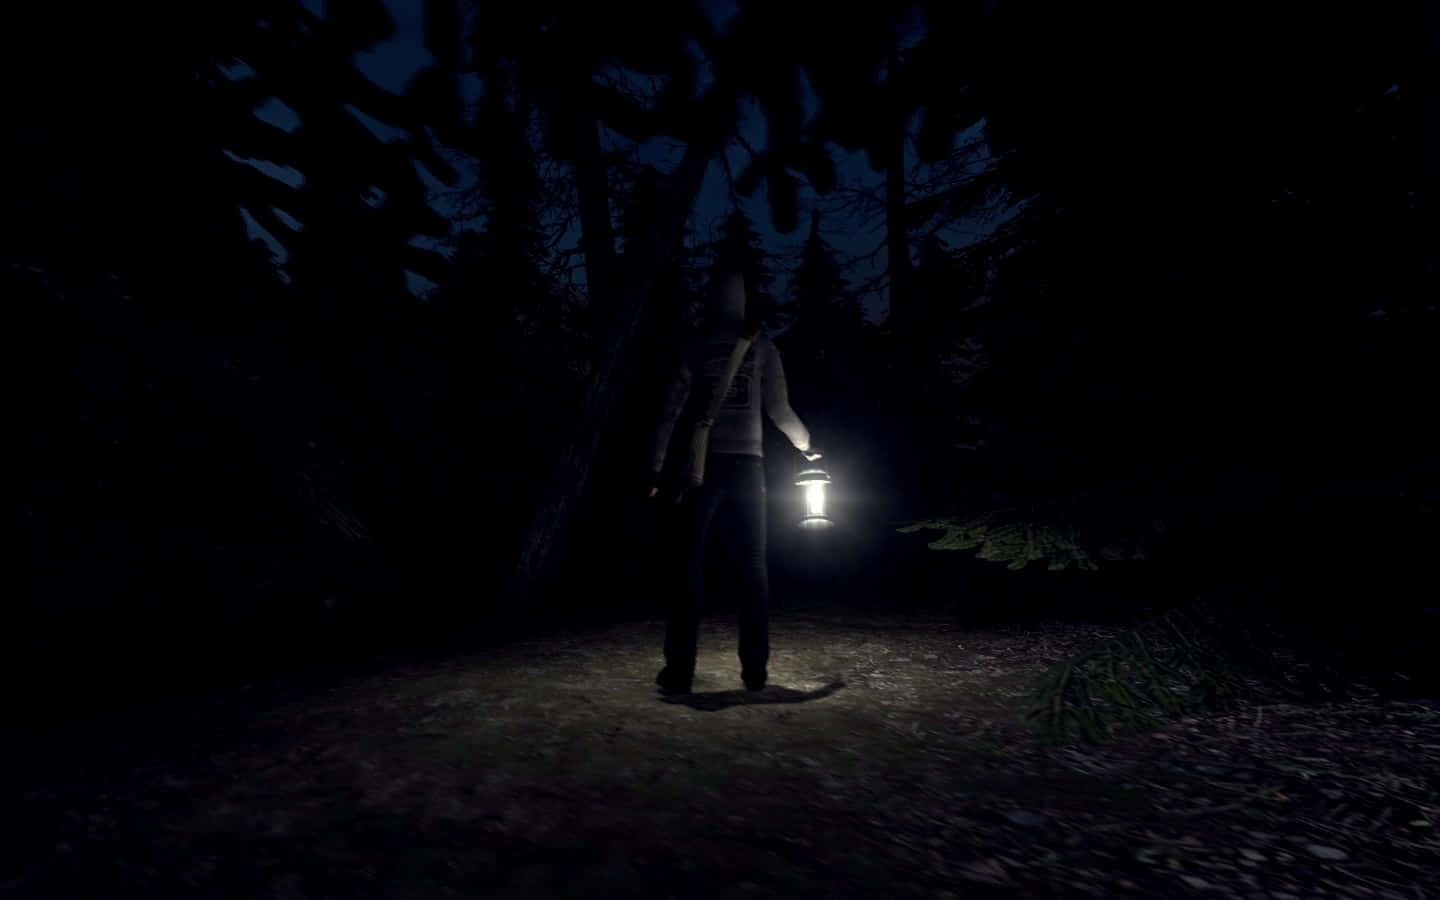 Cryof Fear Nighttime Woods Exploration Wallpaper